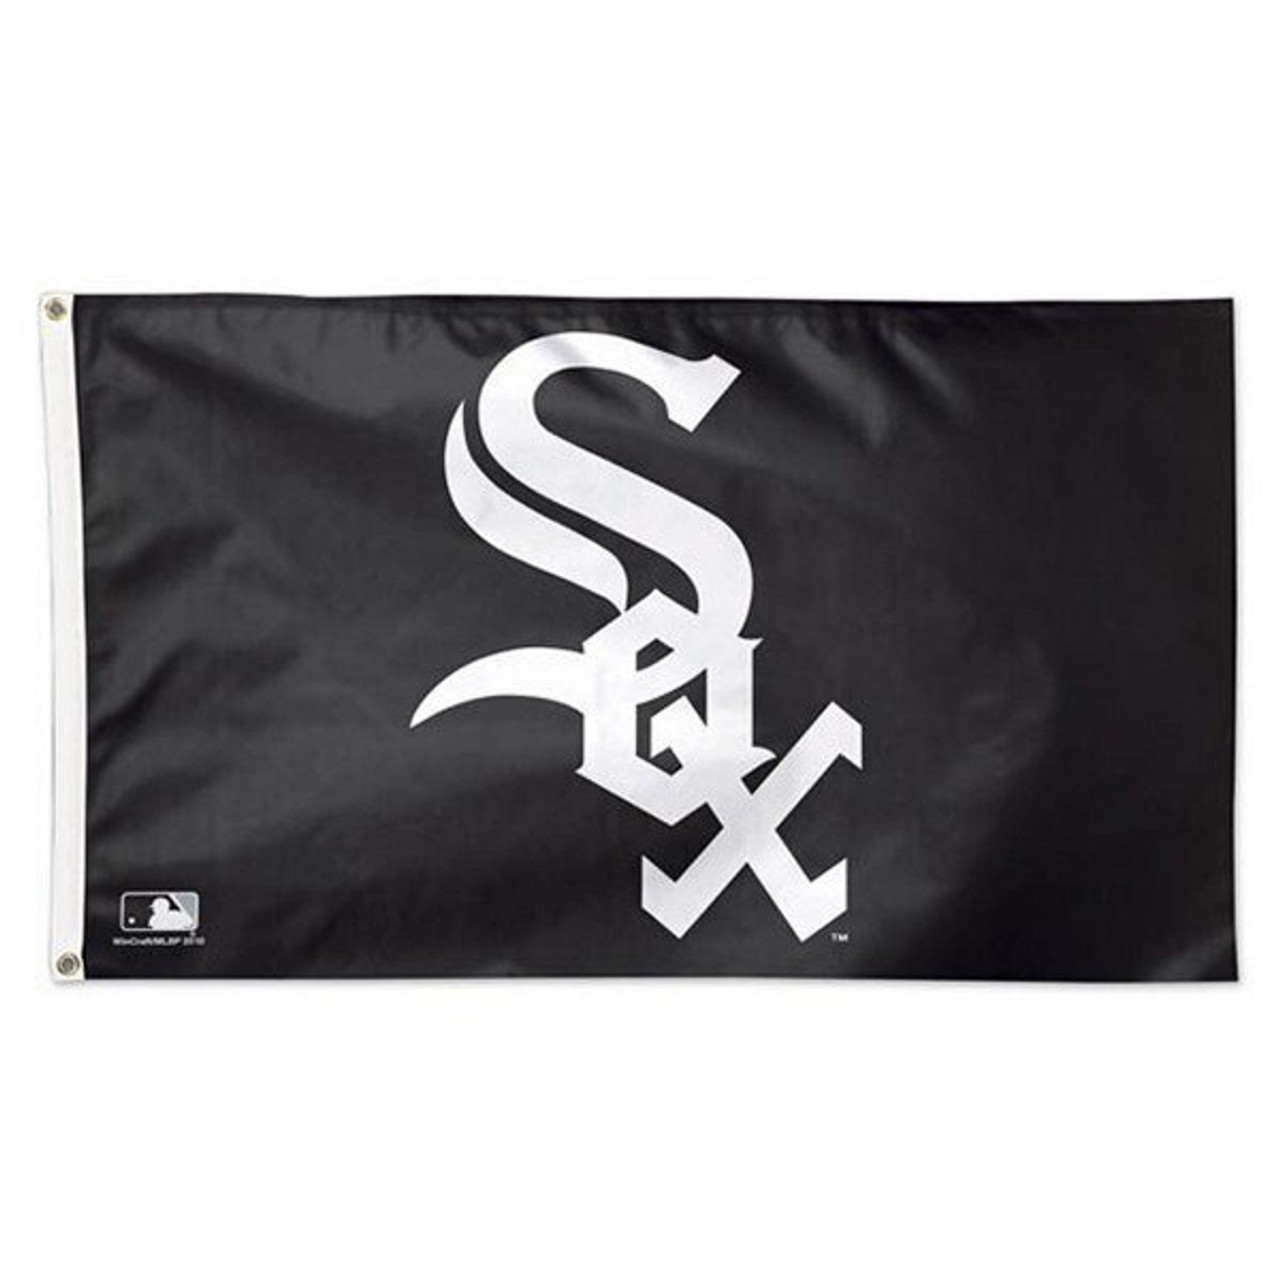 The White Flag Trade, Revisited: There's a hole in the toe of my White Sox  - South Side Sox